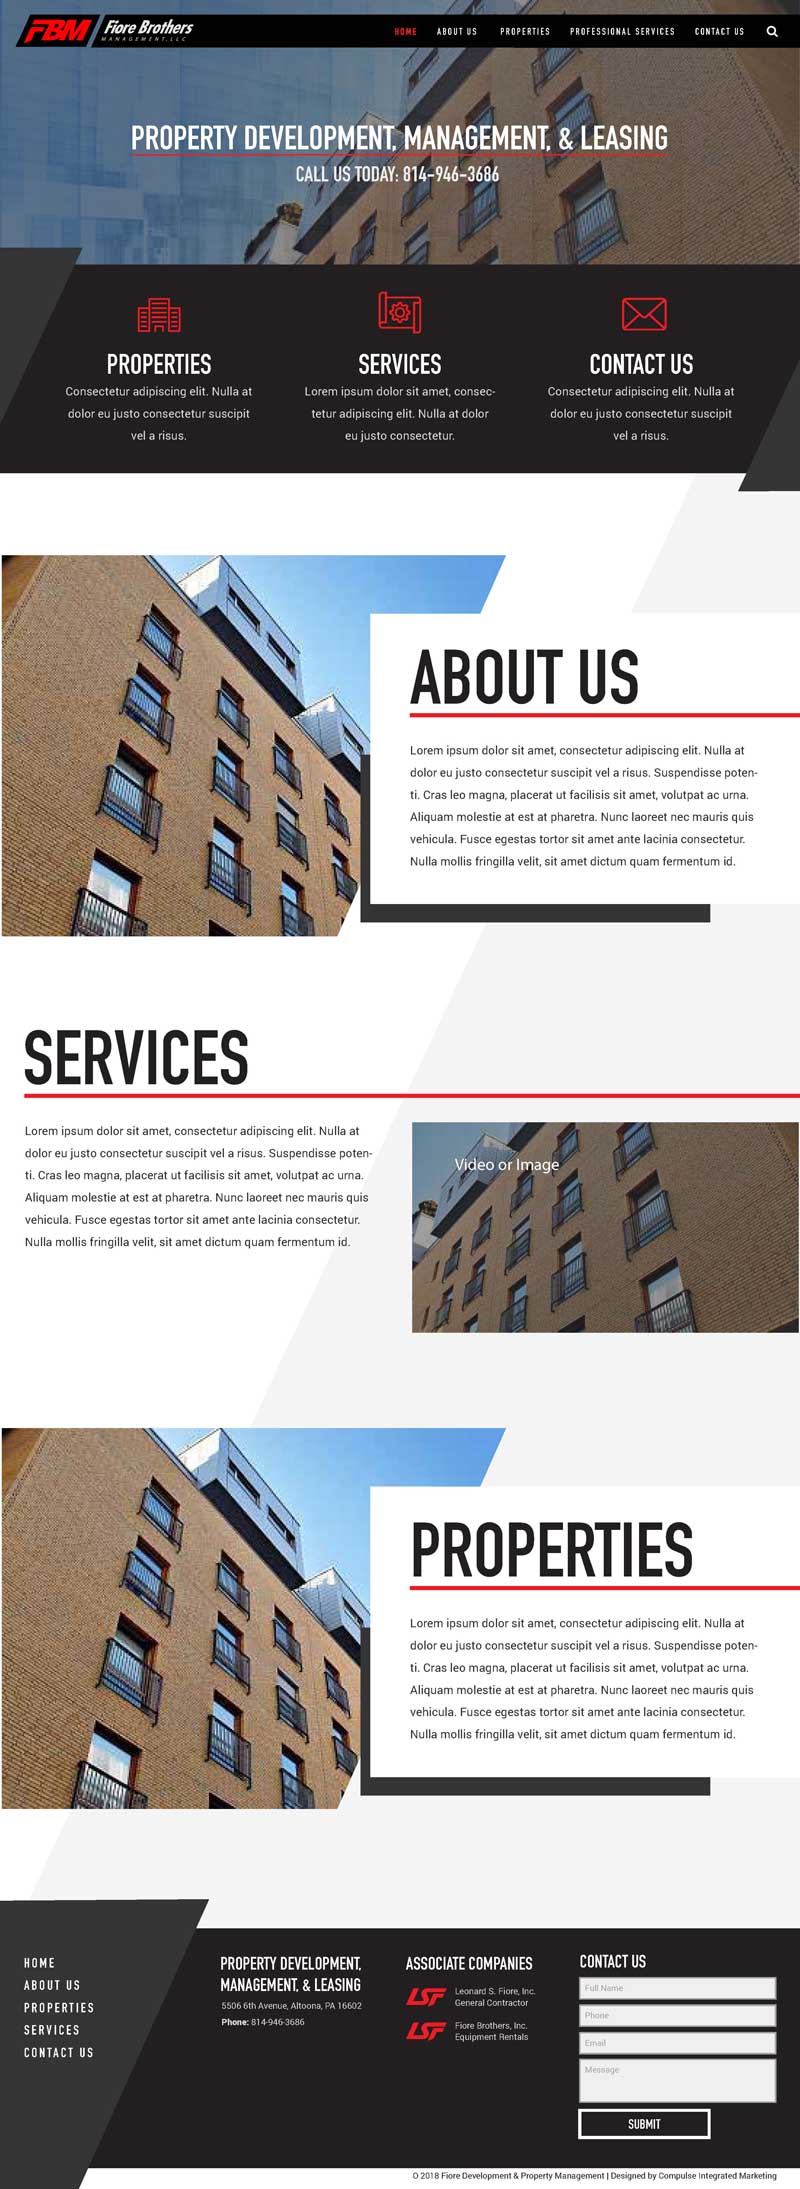 property management homepage